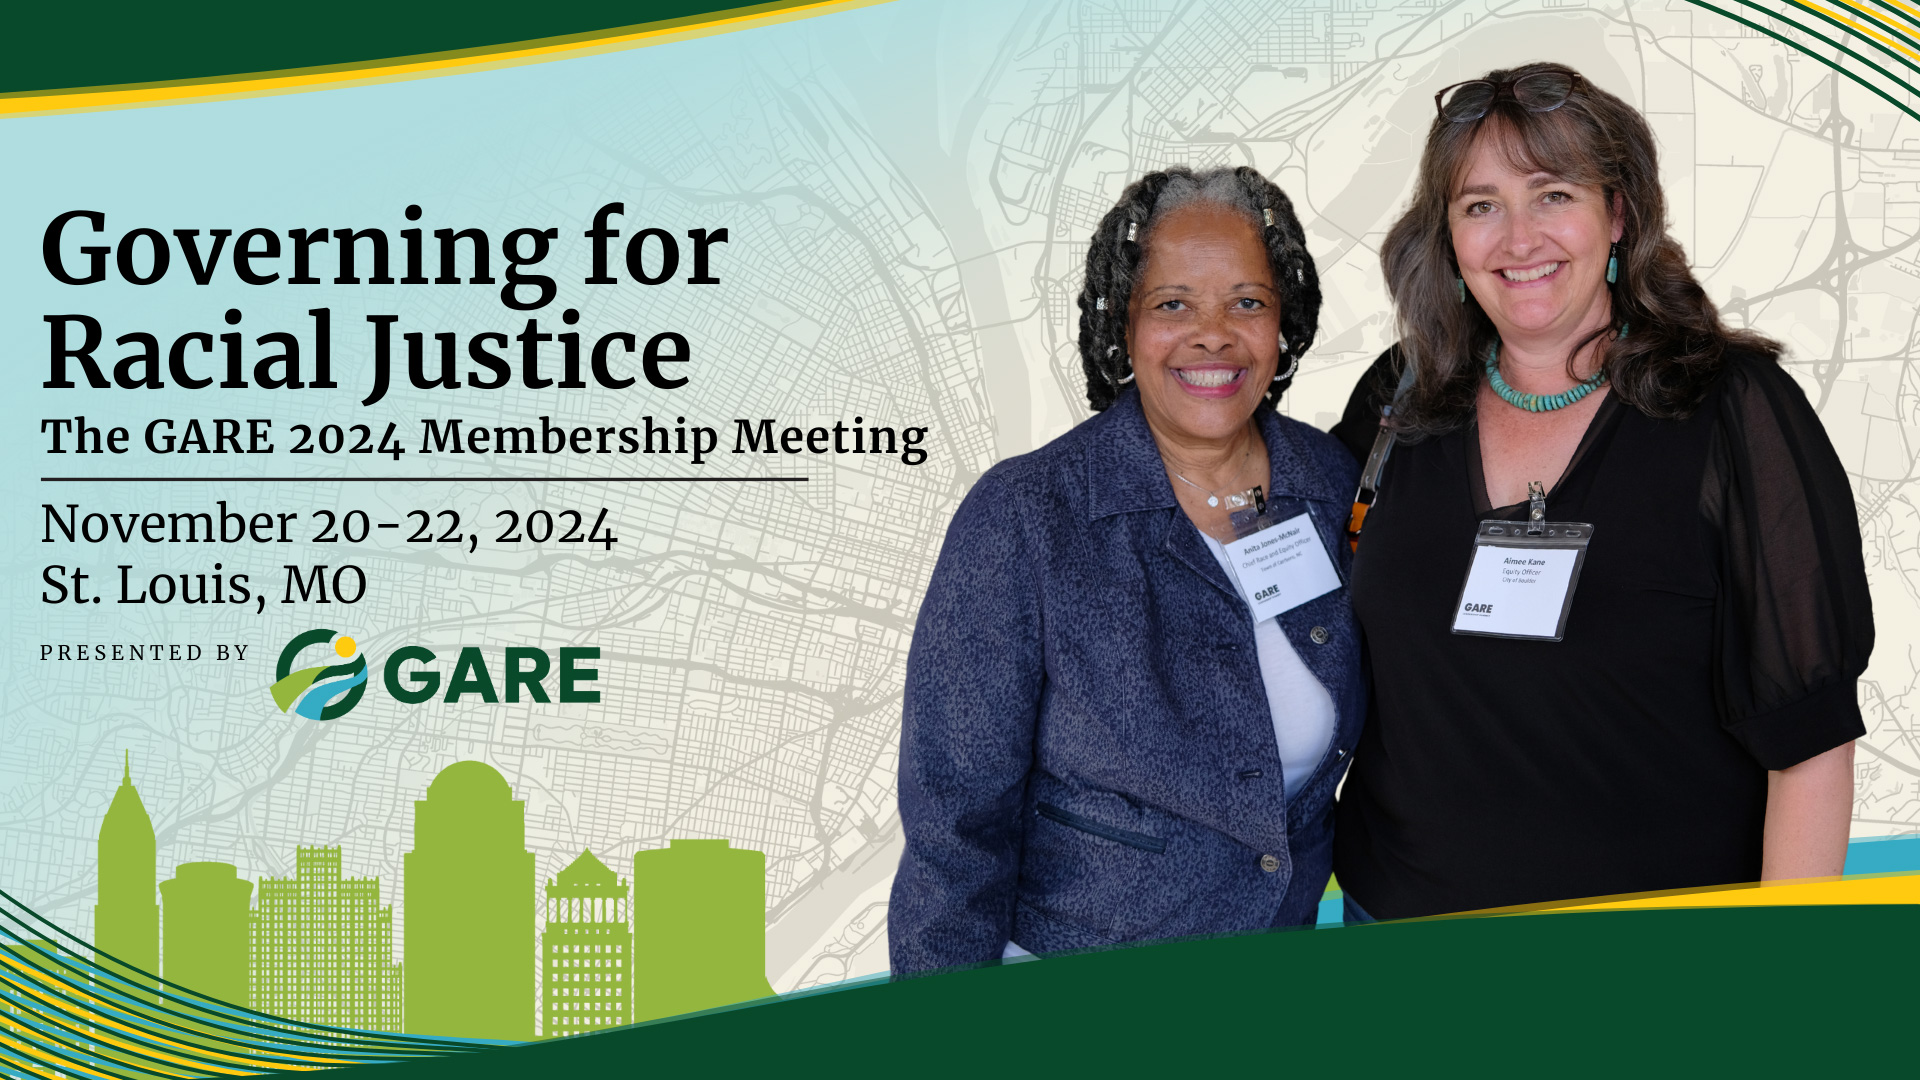 Governing for Racial Justice: The GARE 2024 Membership Meeting. Two people smiling and looking toward camera in a green, drawn, cityscape.